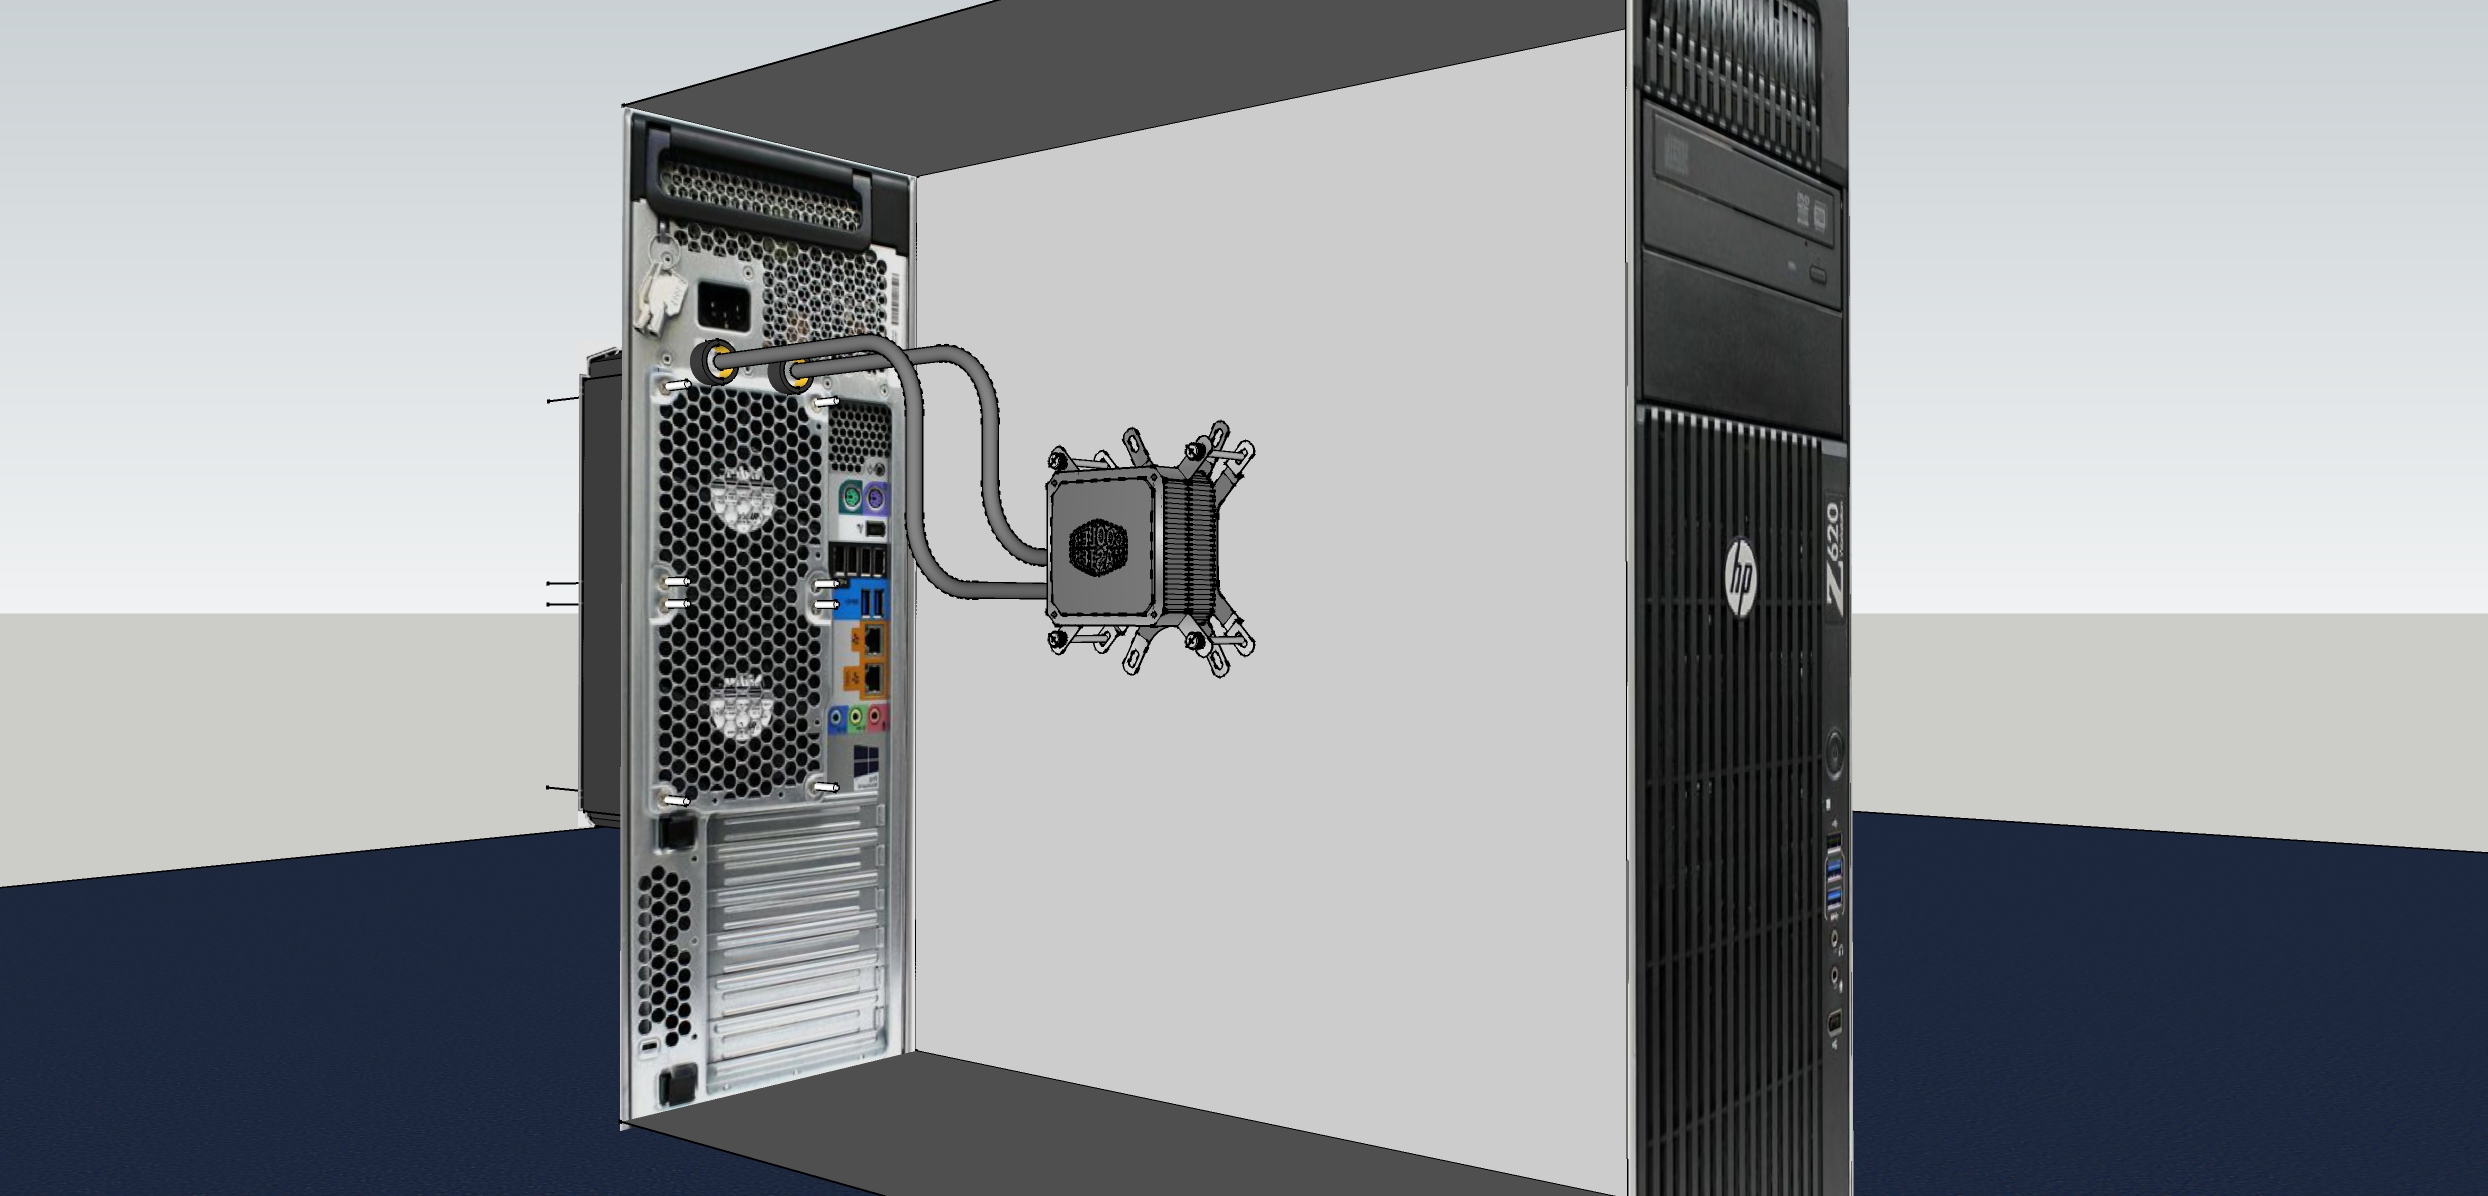 Successful Low Cost Liquid Cooling in HP z620 - HP Support Community -  6251919